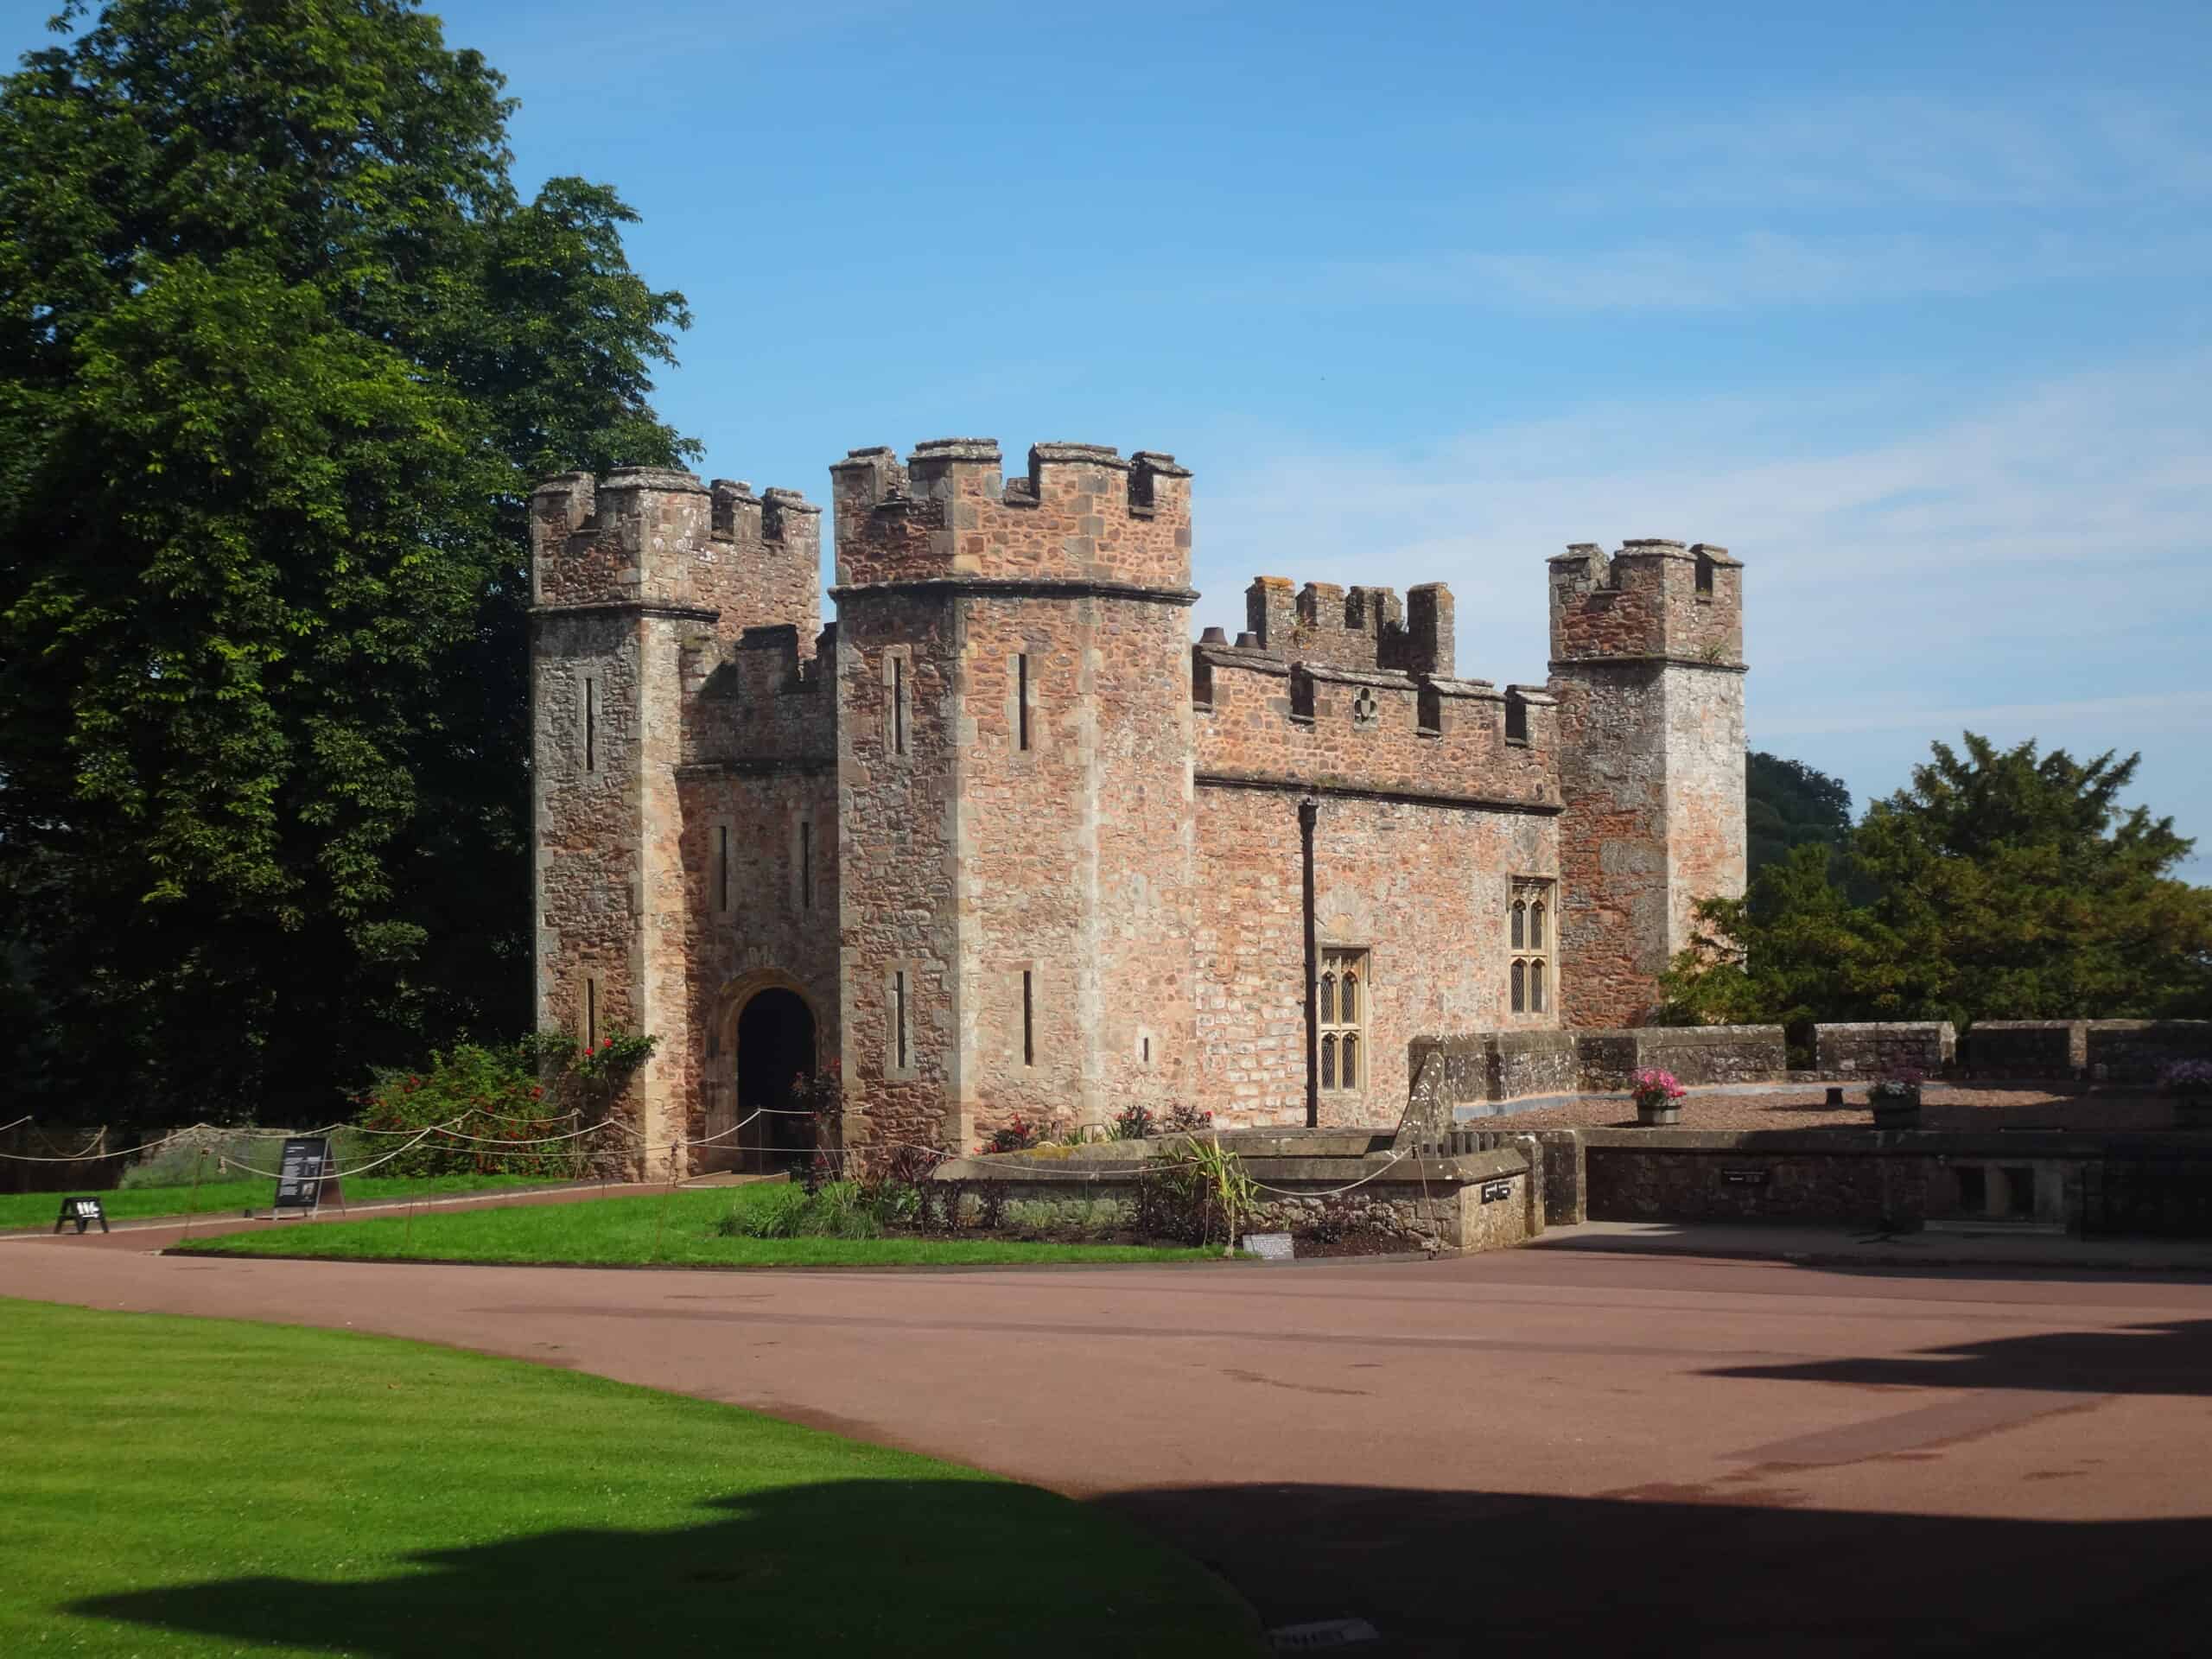 The Places Where We Go are exploring Dunster and visit Dunster Castle